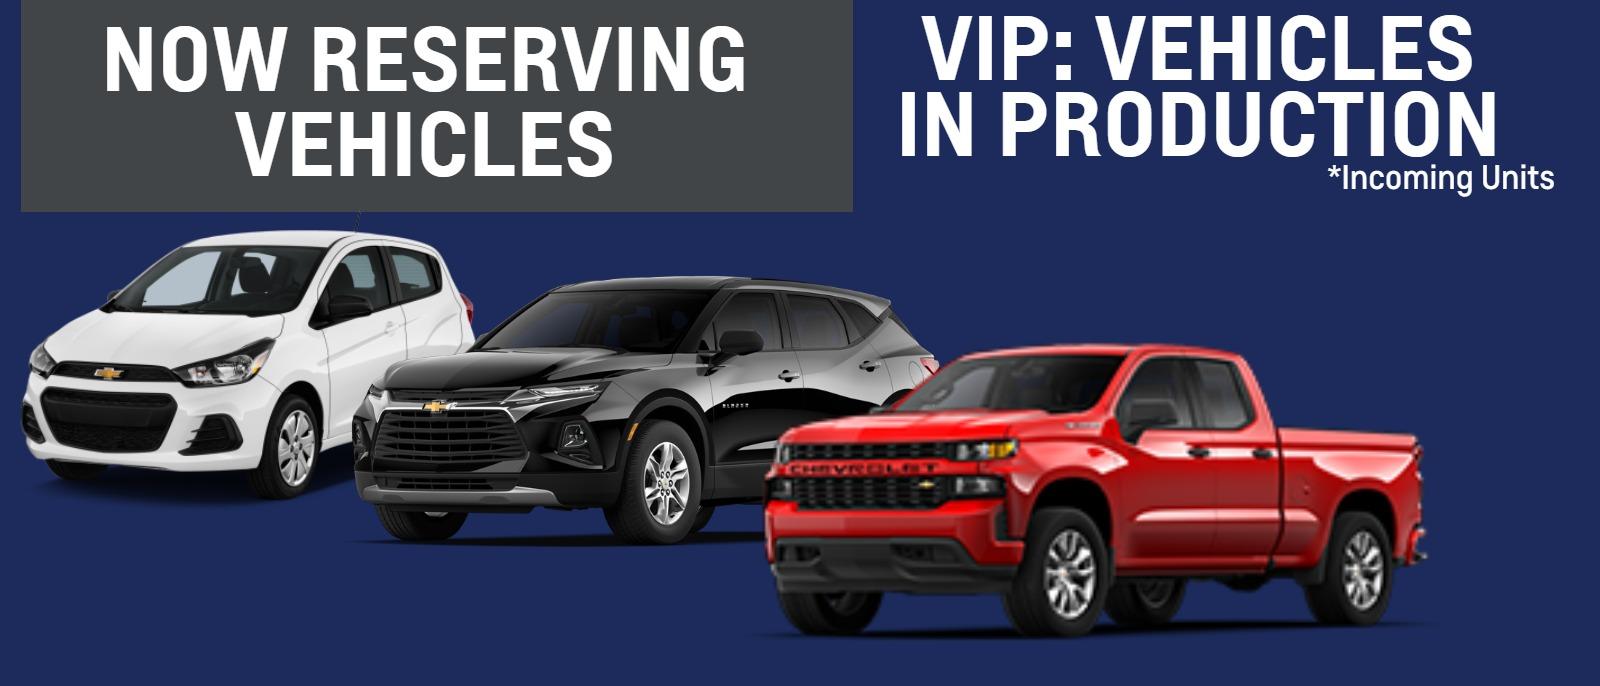 Now Reserving Vehicles
Vip: Vehicles In Production
*Incoming Units